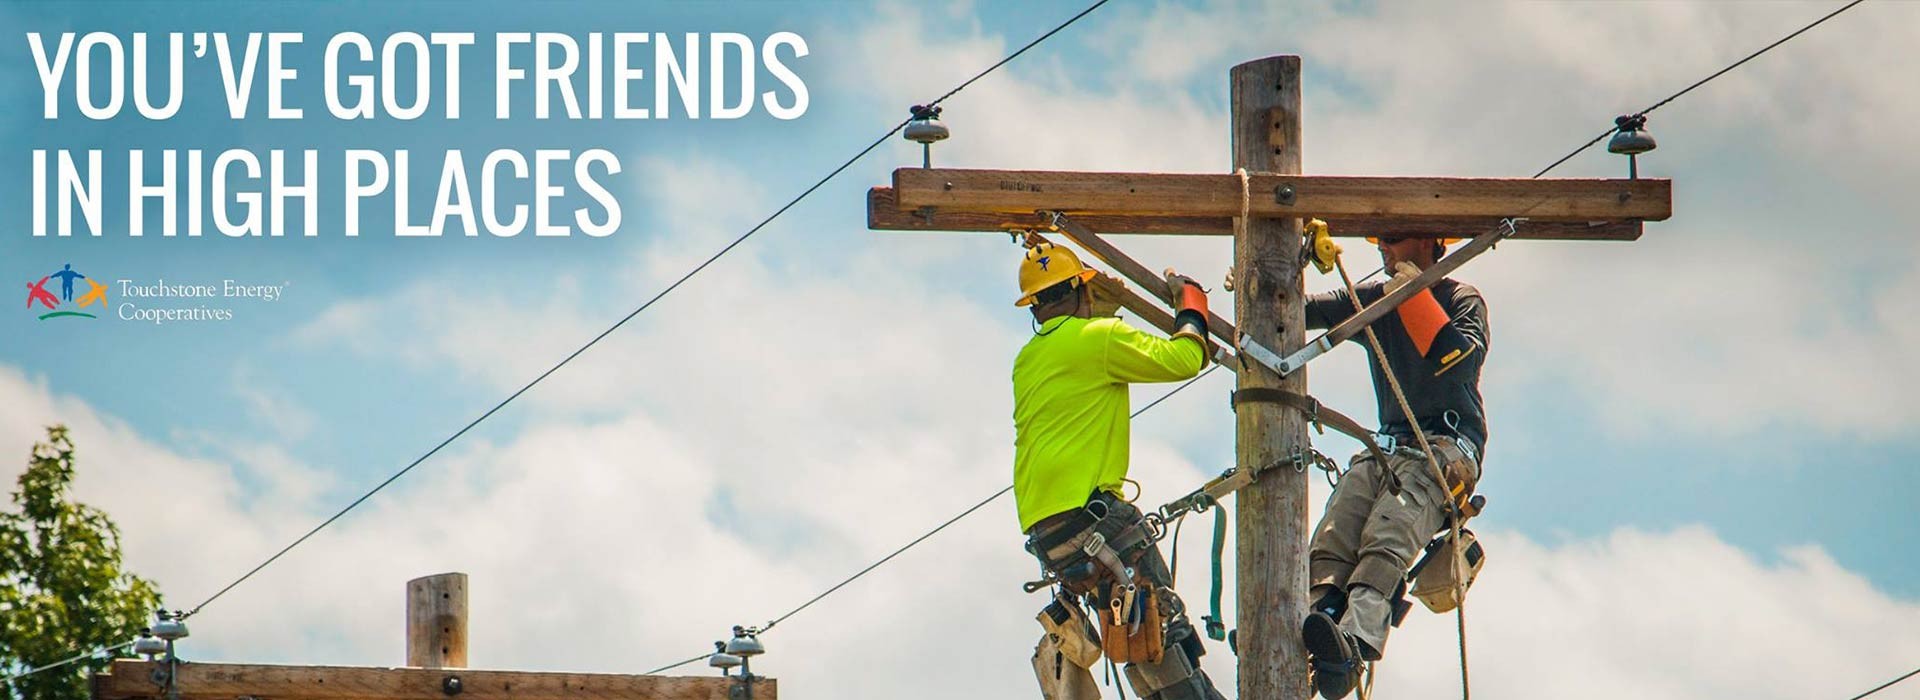 You've Got Friends in High Places - Touchstone Energy Cooperatives (Men working on power lines)